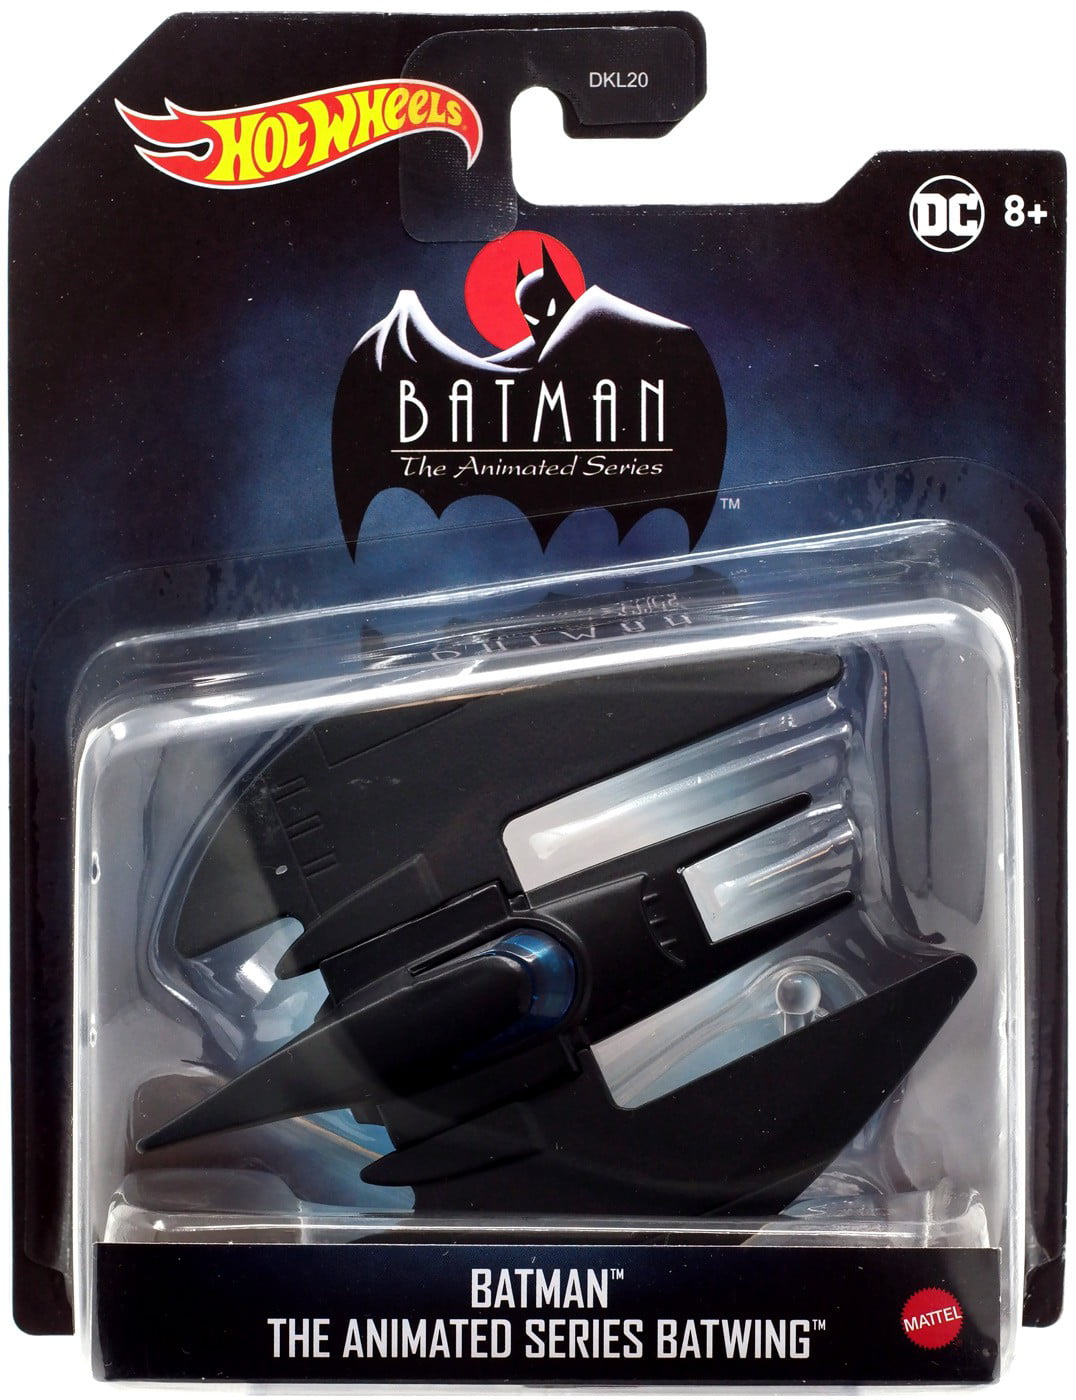 HOT WHEELS 80 YEARS BATMAN THE ANIMATED SERIES BATWING 1:50 SCALE 2 